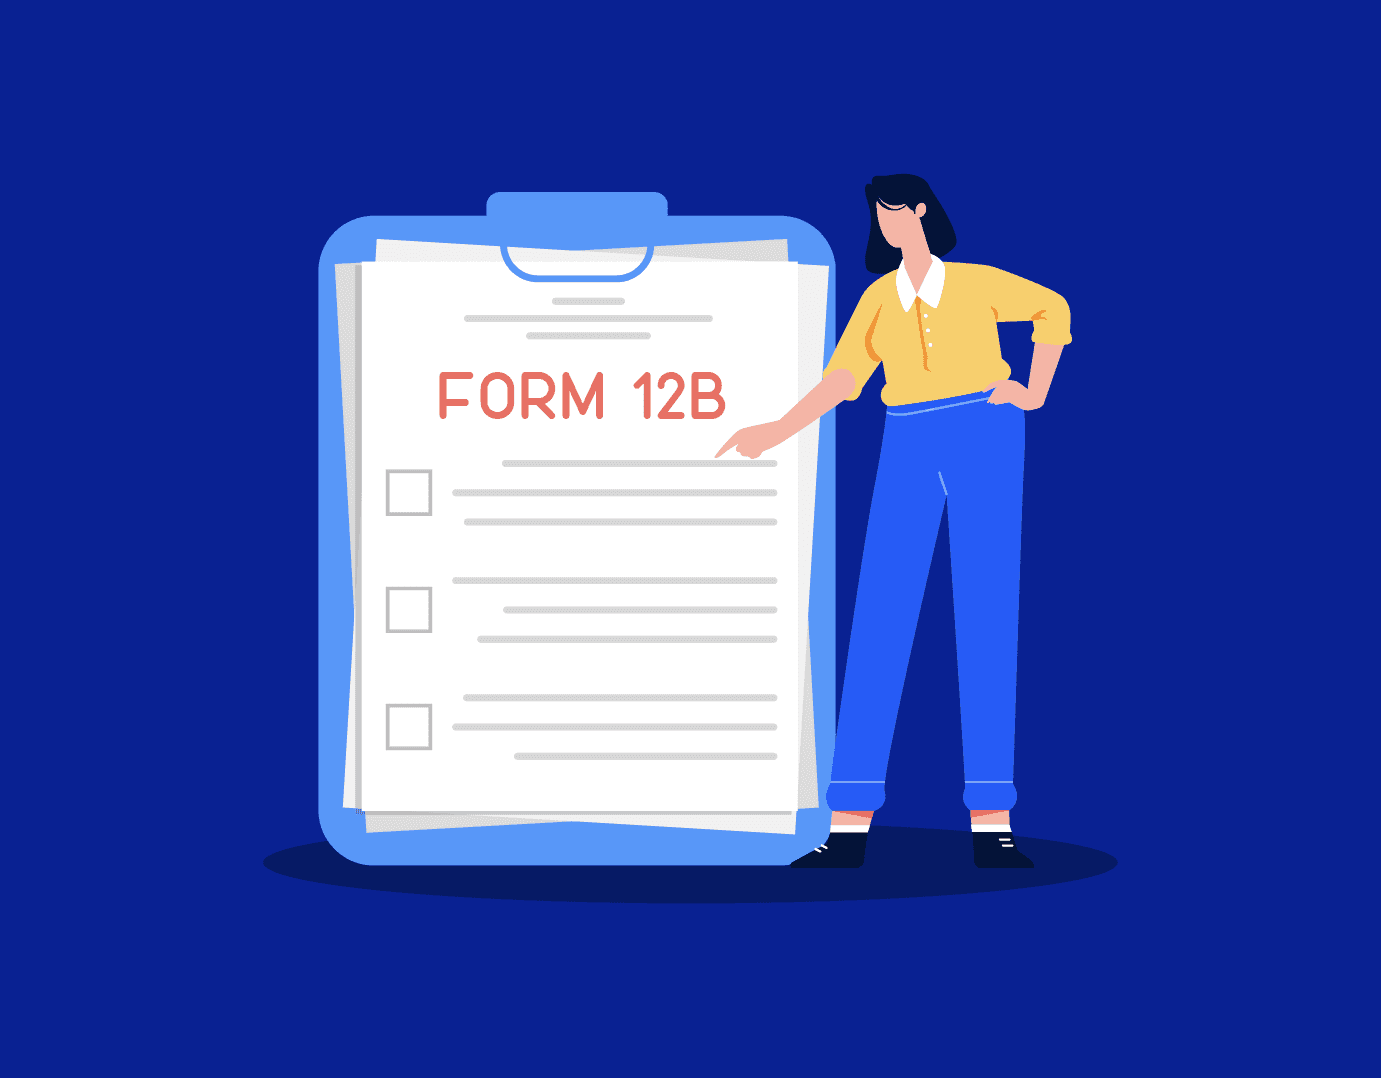 Guide to Form 12B